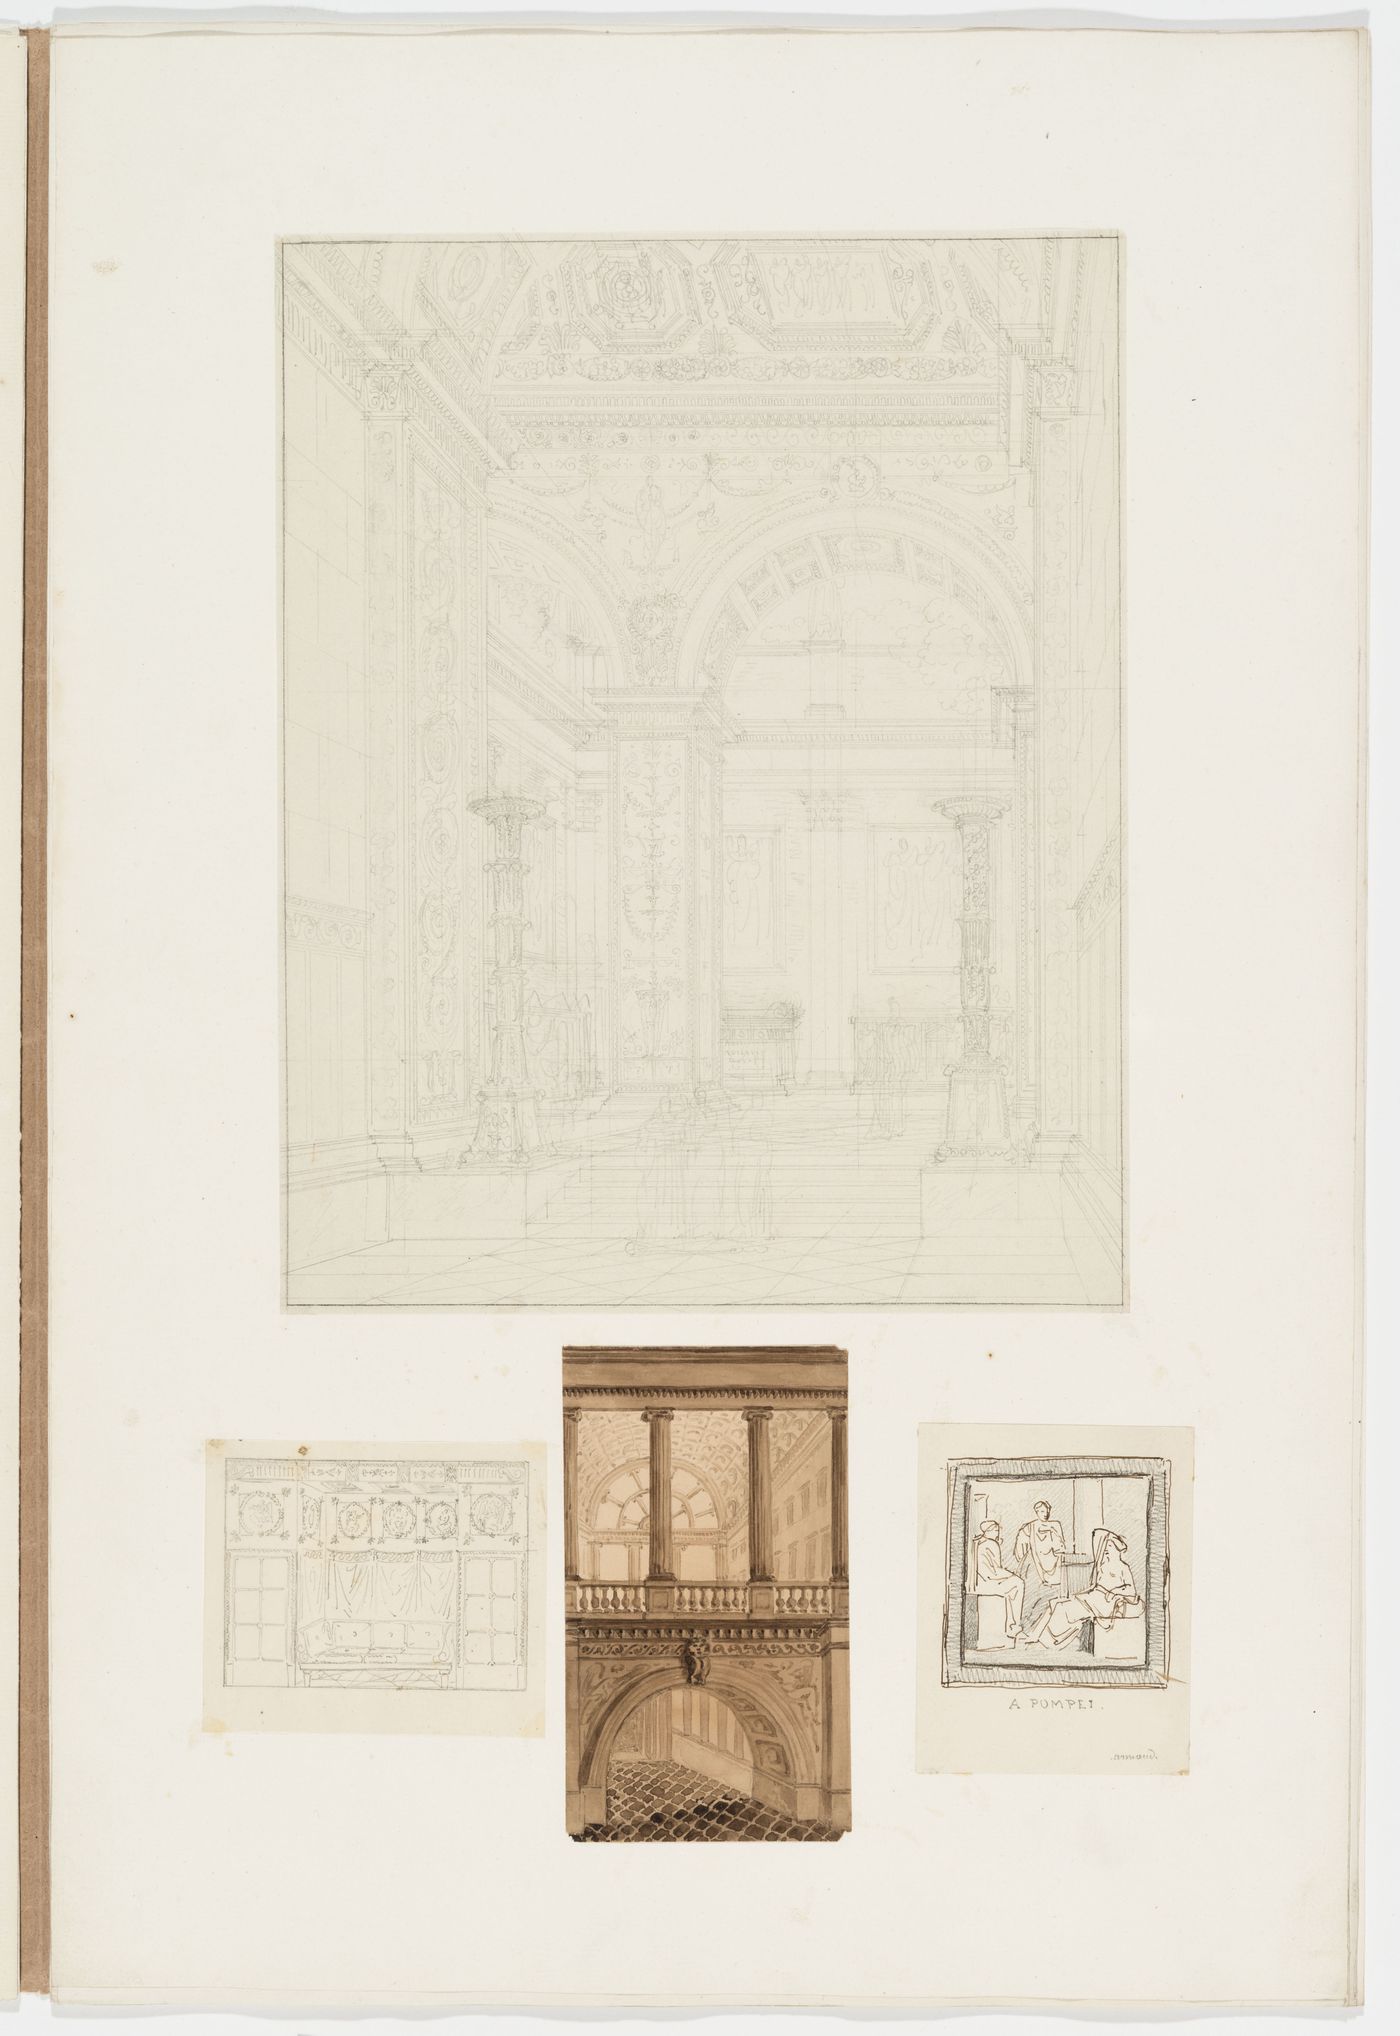 Interior perspective drawing for an imaginary church, perhaps inspired by Pugin; Elevation of an interior wall with seating alcove; View of an interior with gallery and arched doorway; Drawing of a sculpted panel, Pompeii